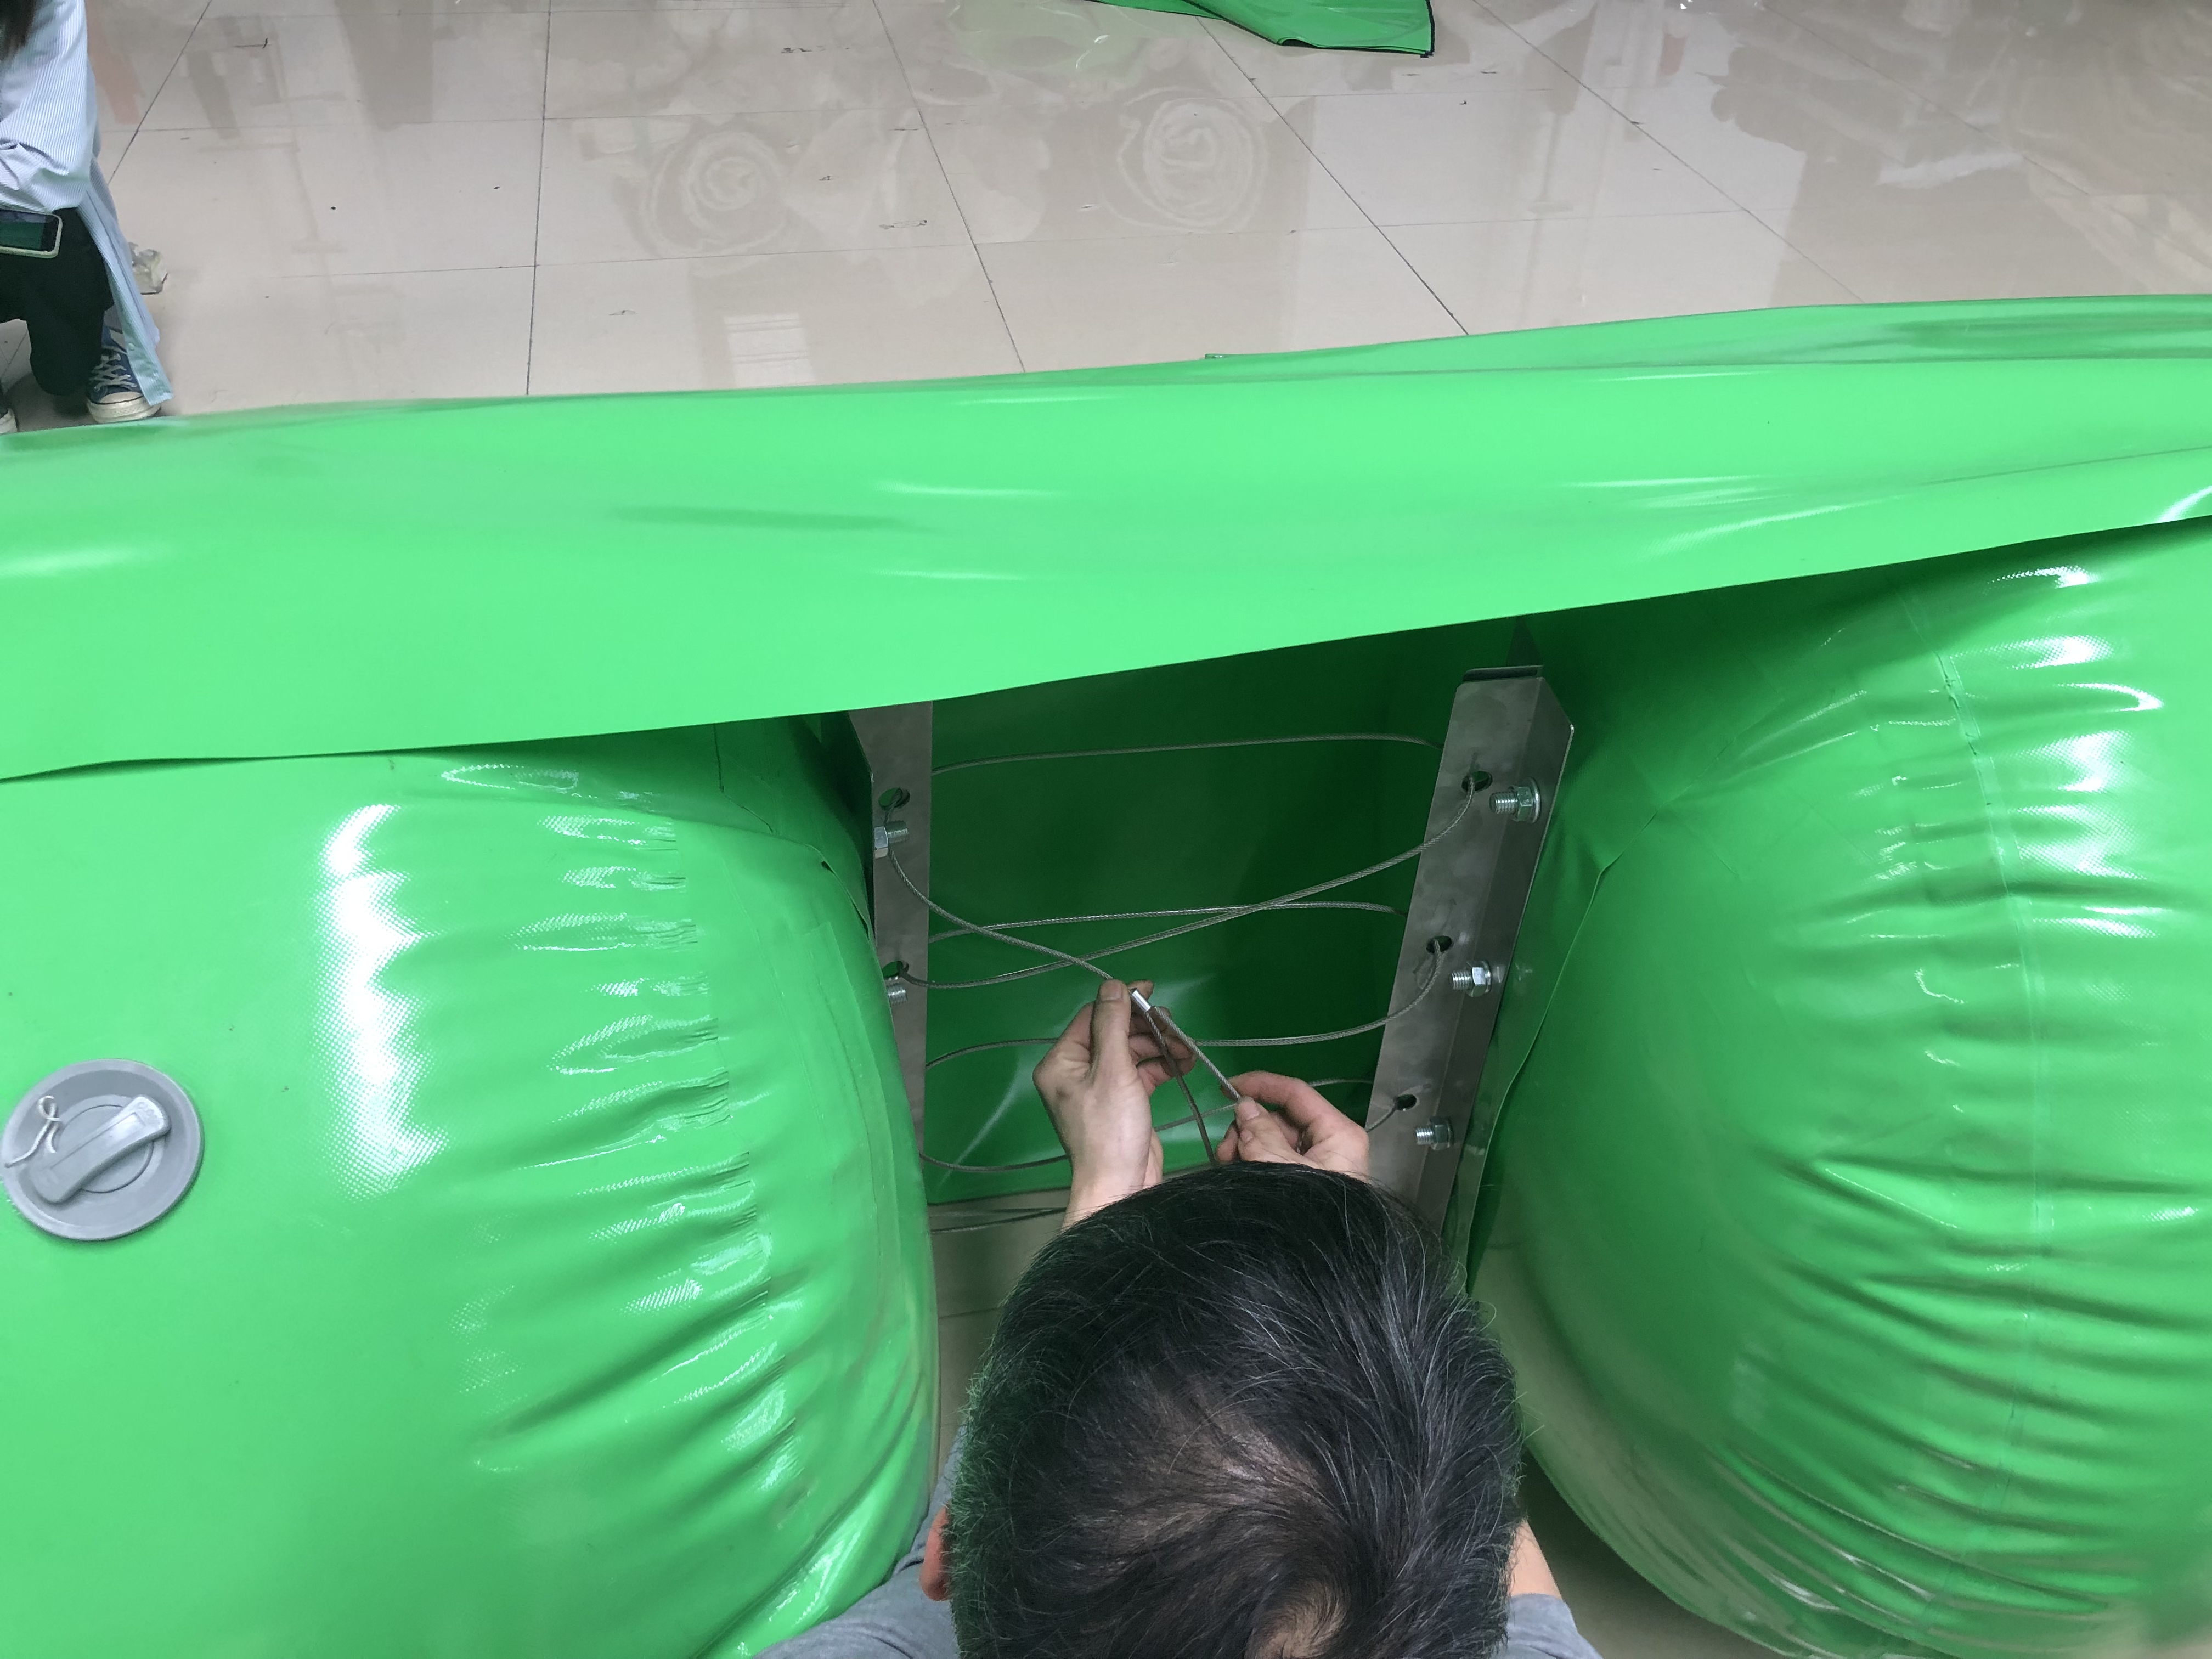 residential flood protection barriers,temporary flood protection barriers,inflatable water barrier,water barrier,green inflatable flood barrier tube,Connection of flood barrier